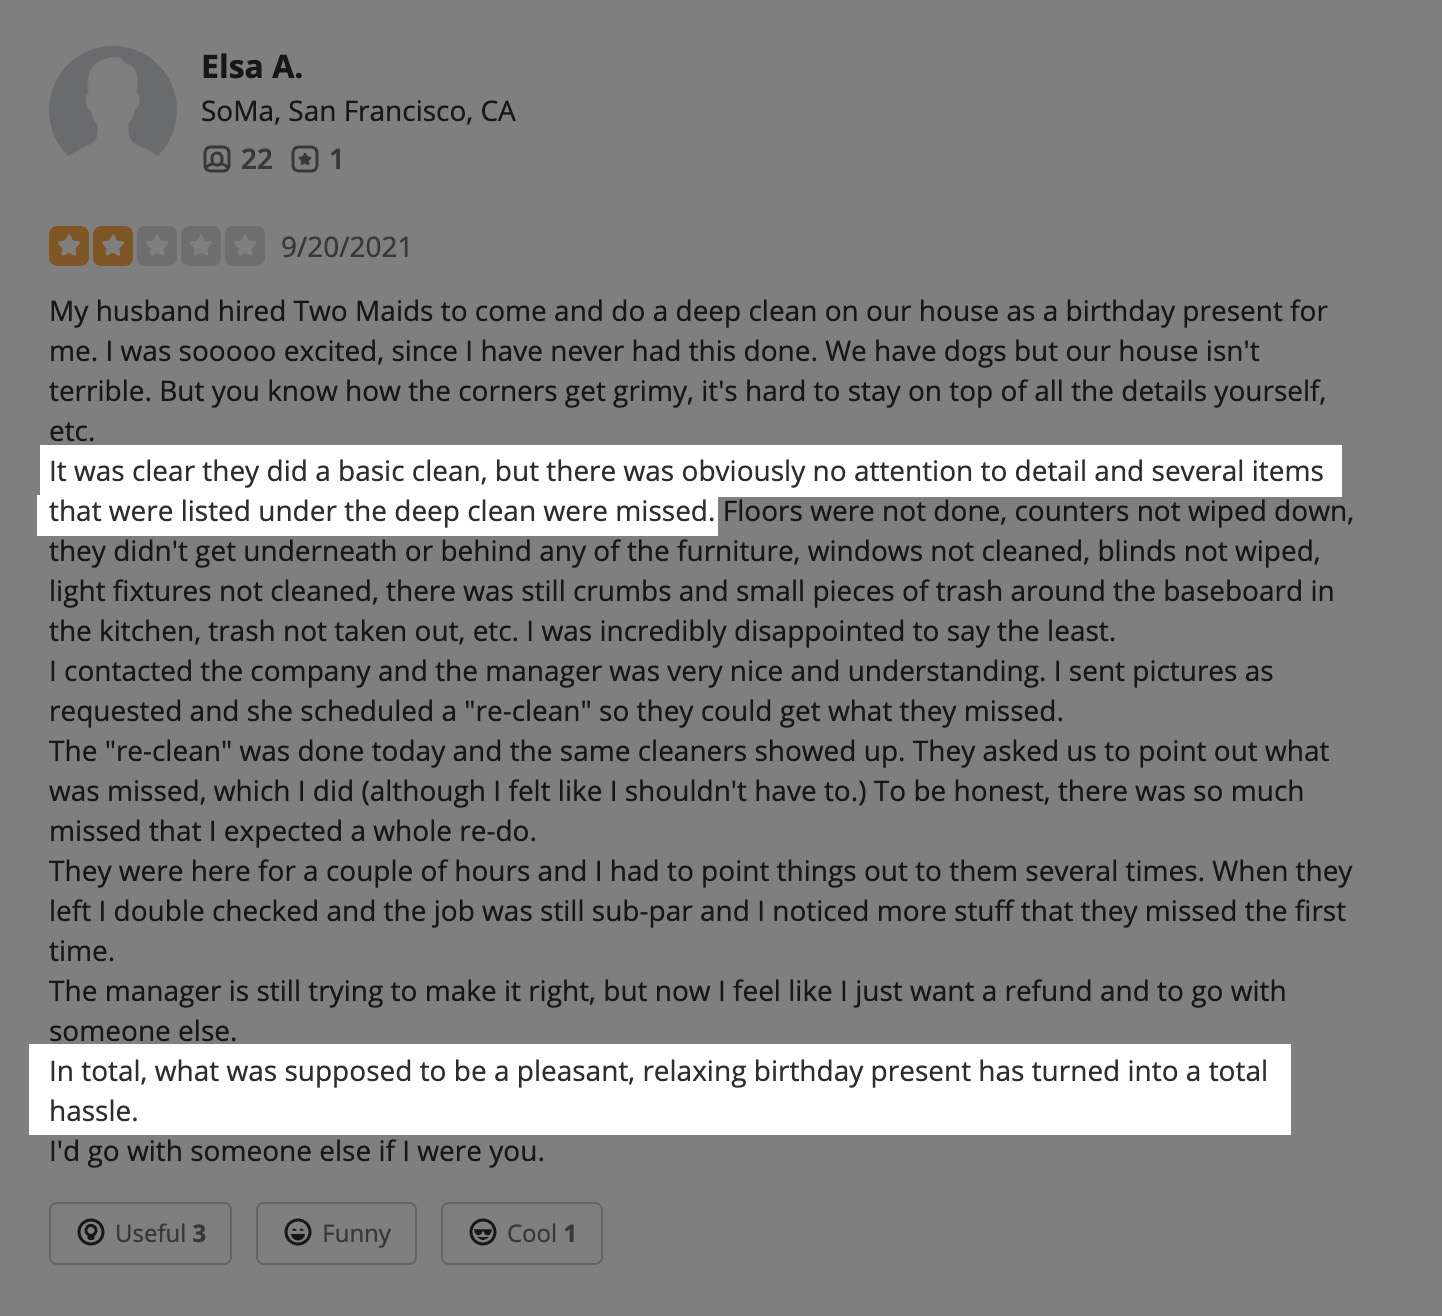 A screenshot of a 2-star review on Yelp of a cleaning service with some lines highlighted for clarity. In this example the customer in question wanted a relaxing birthday and did not get it as a result of a botched cleaning job.